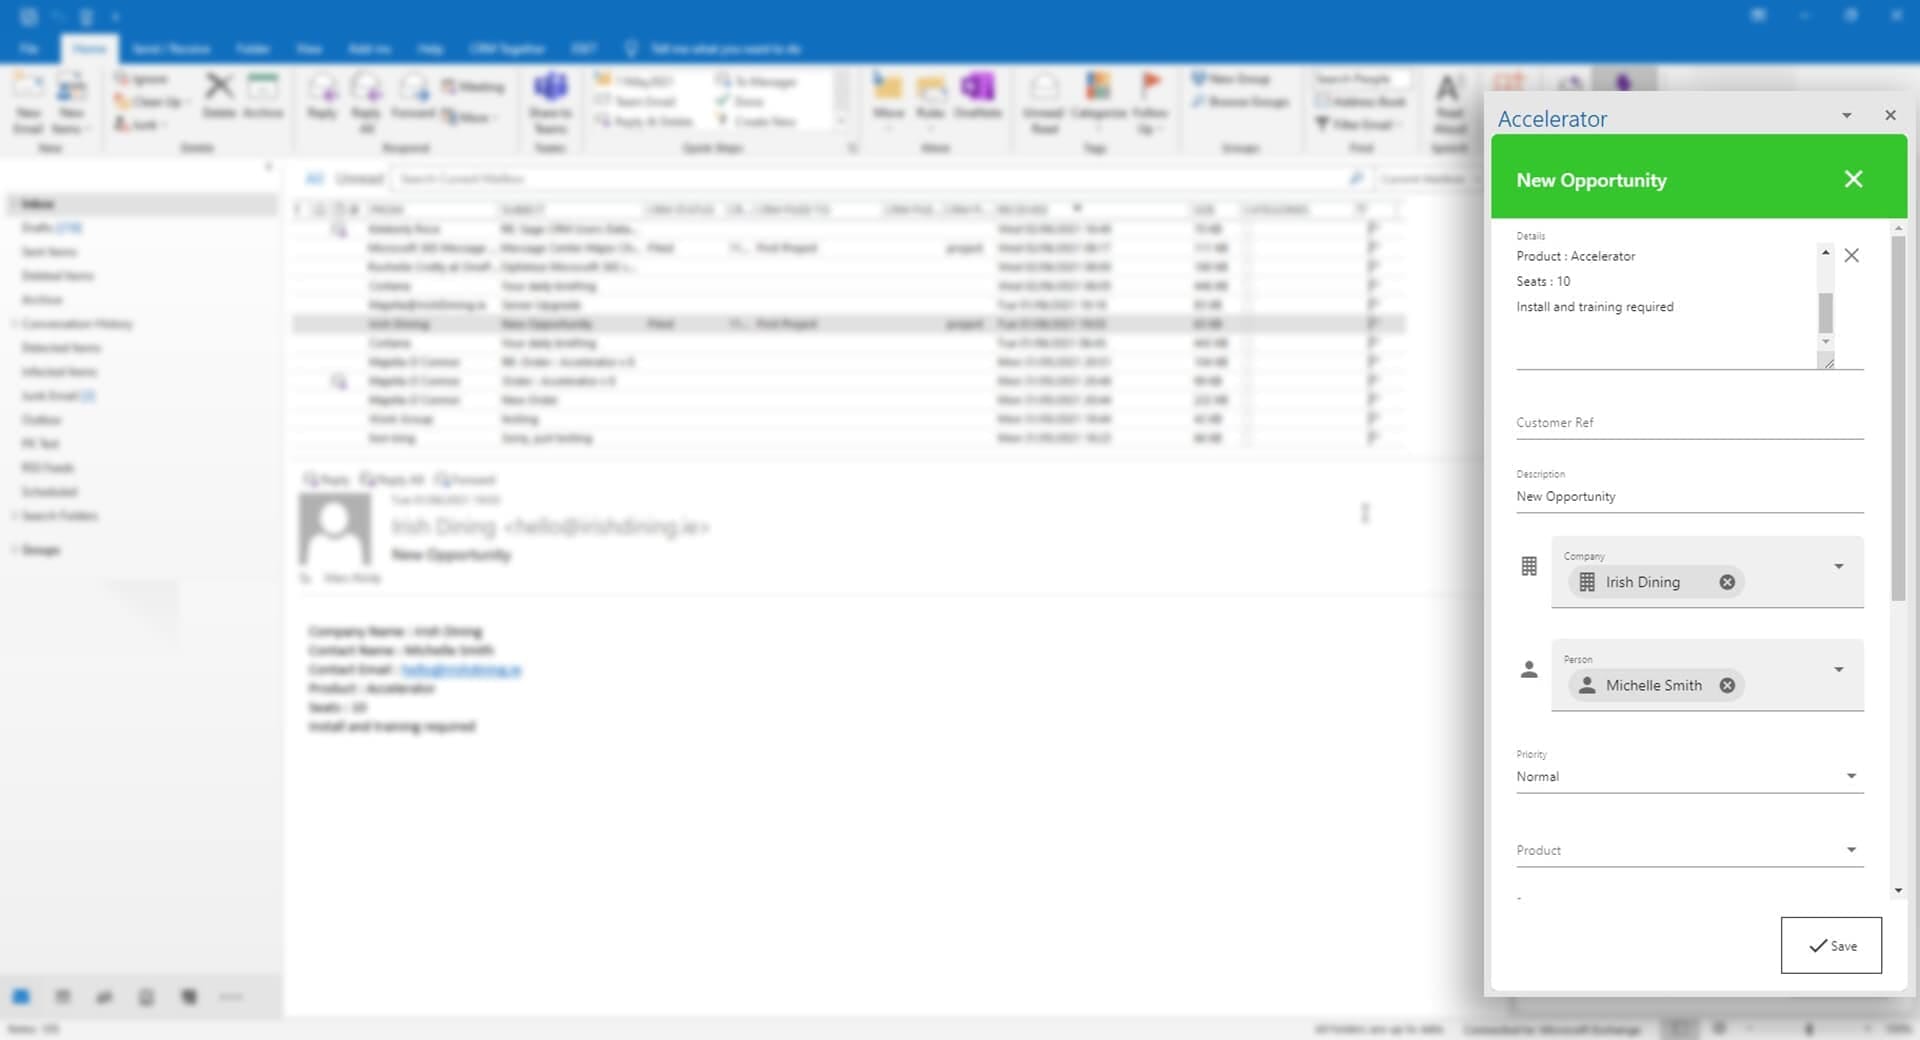 Create Cases in Sage CRM from Outlook Email